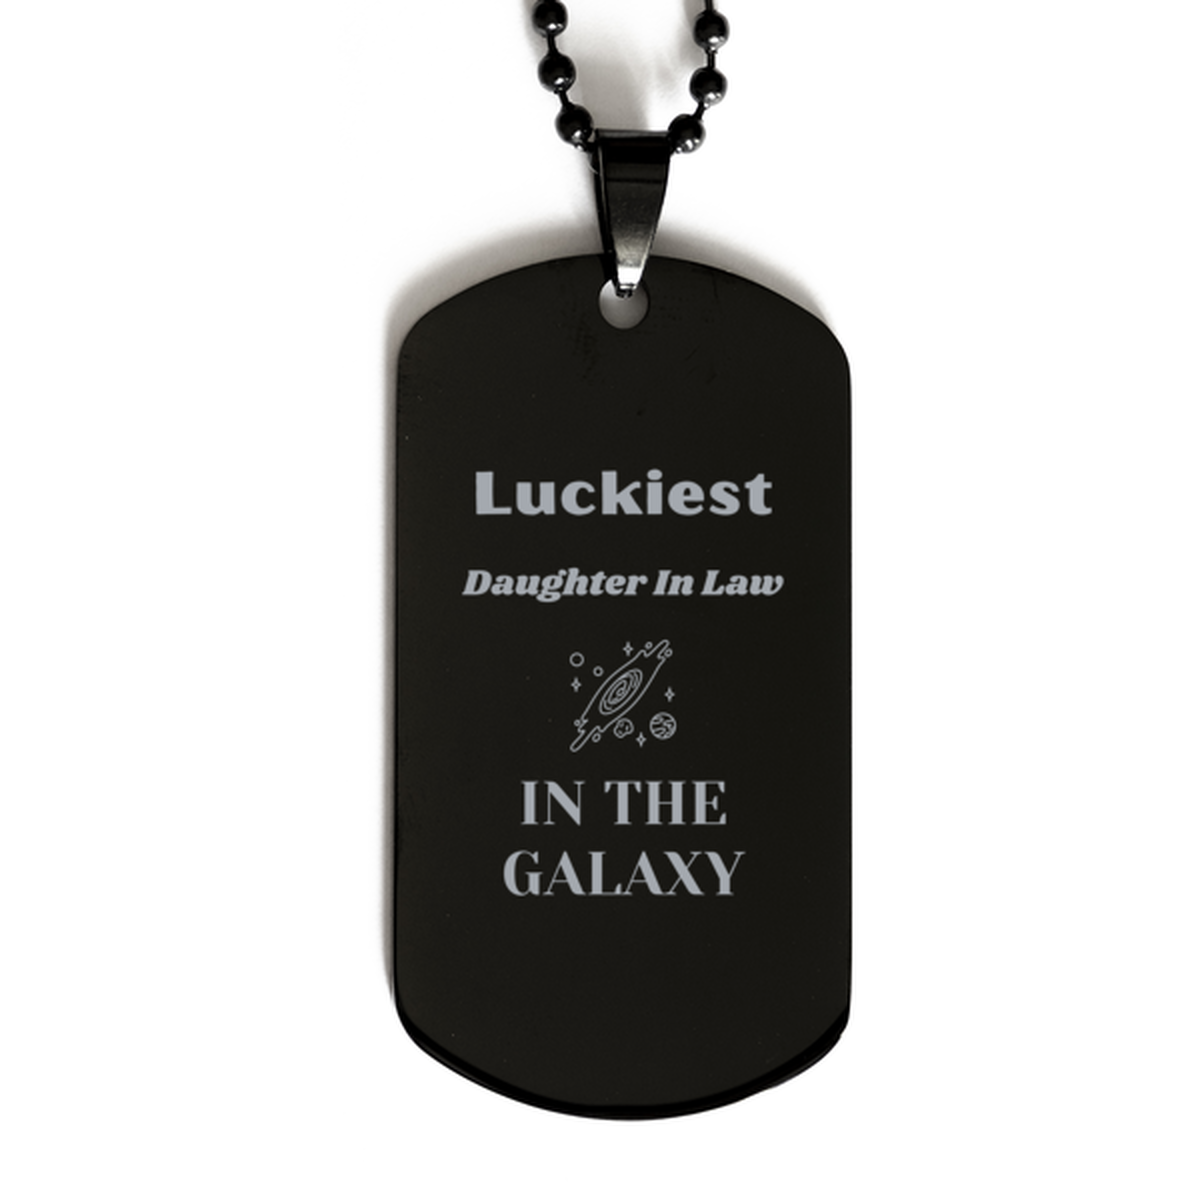 Luckiest Daughter In Law in the Galaxy, To My Daughter In Law Engraved Gifts, Christmas Daughter In Law Black Dog Tag Gifts, X-mas Birthday Unique Gifts For Daughter In Law Men Women